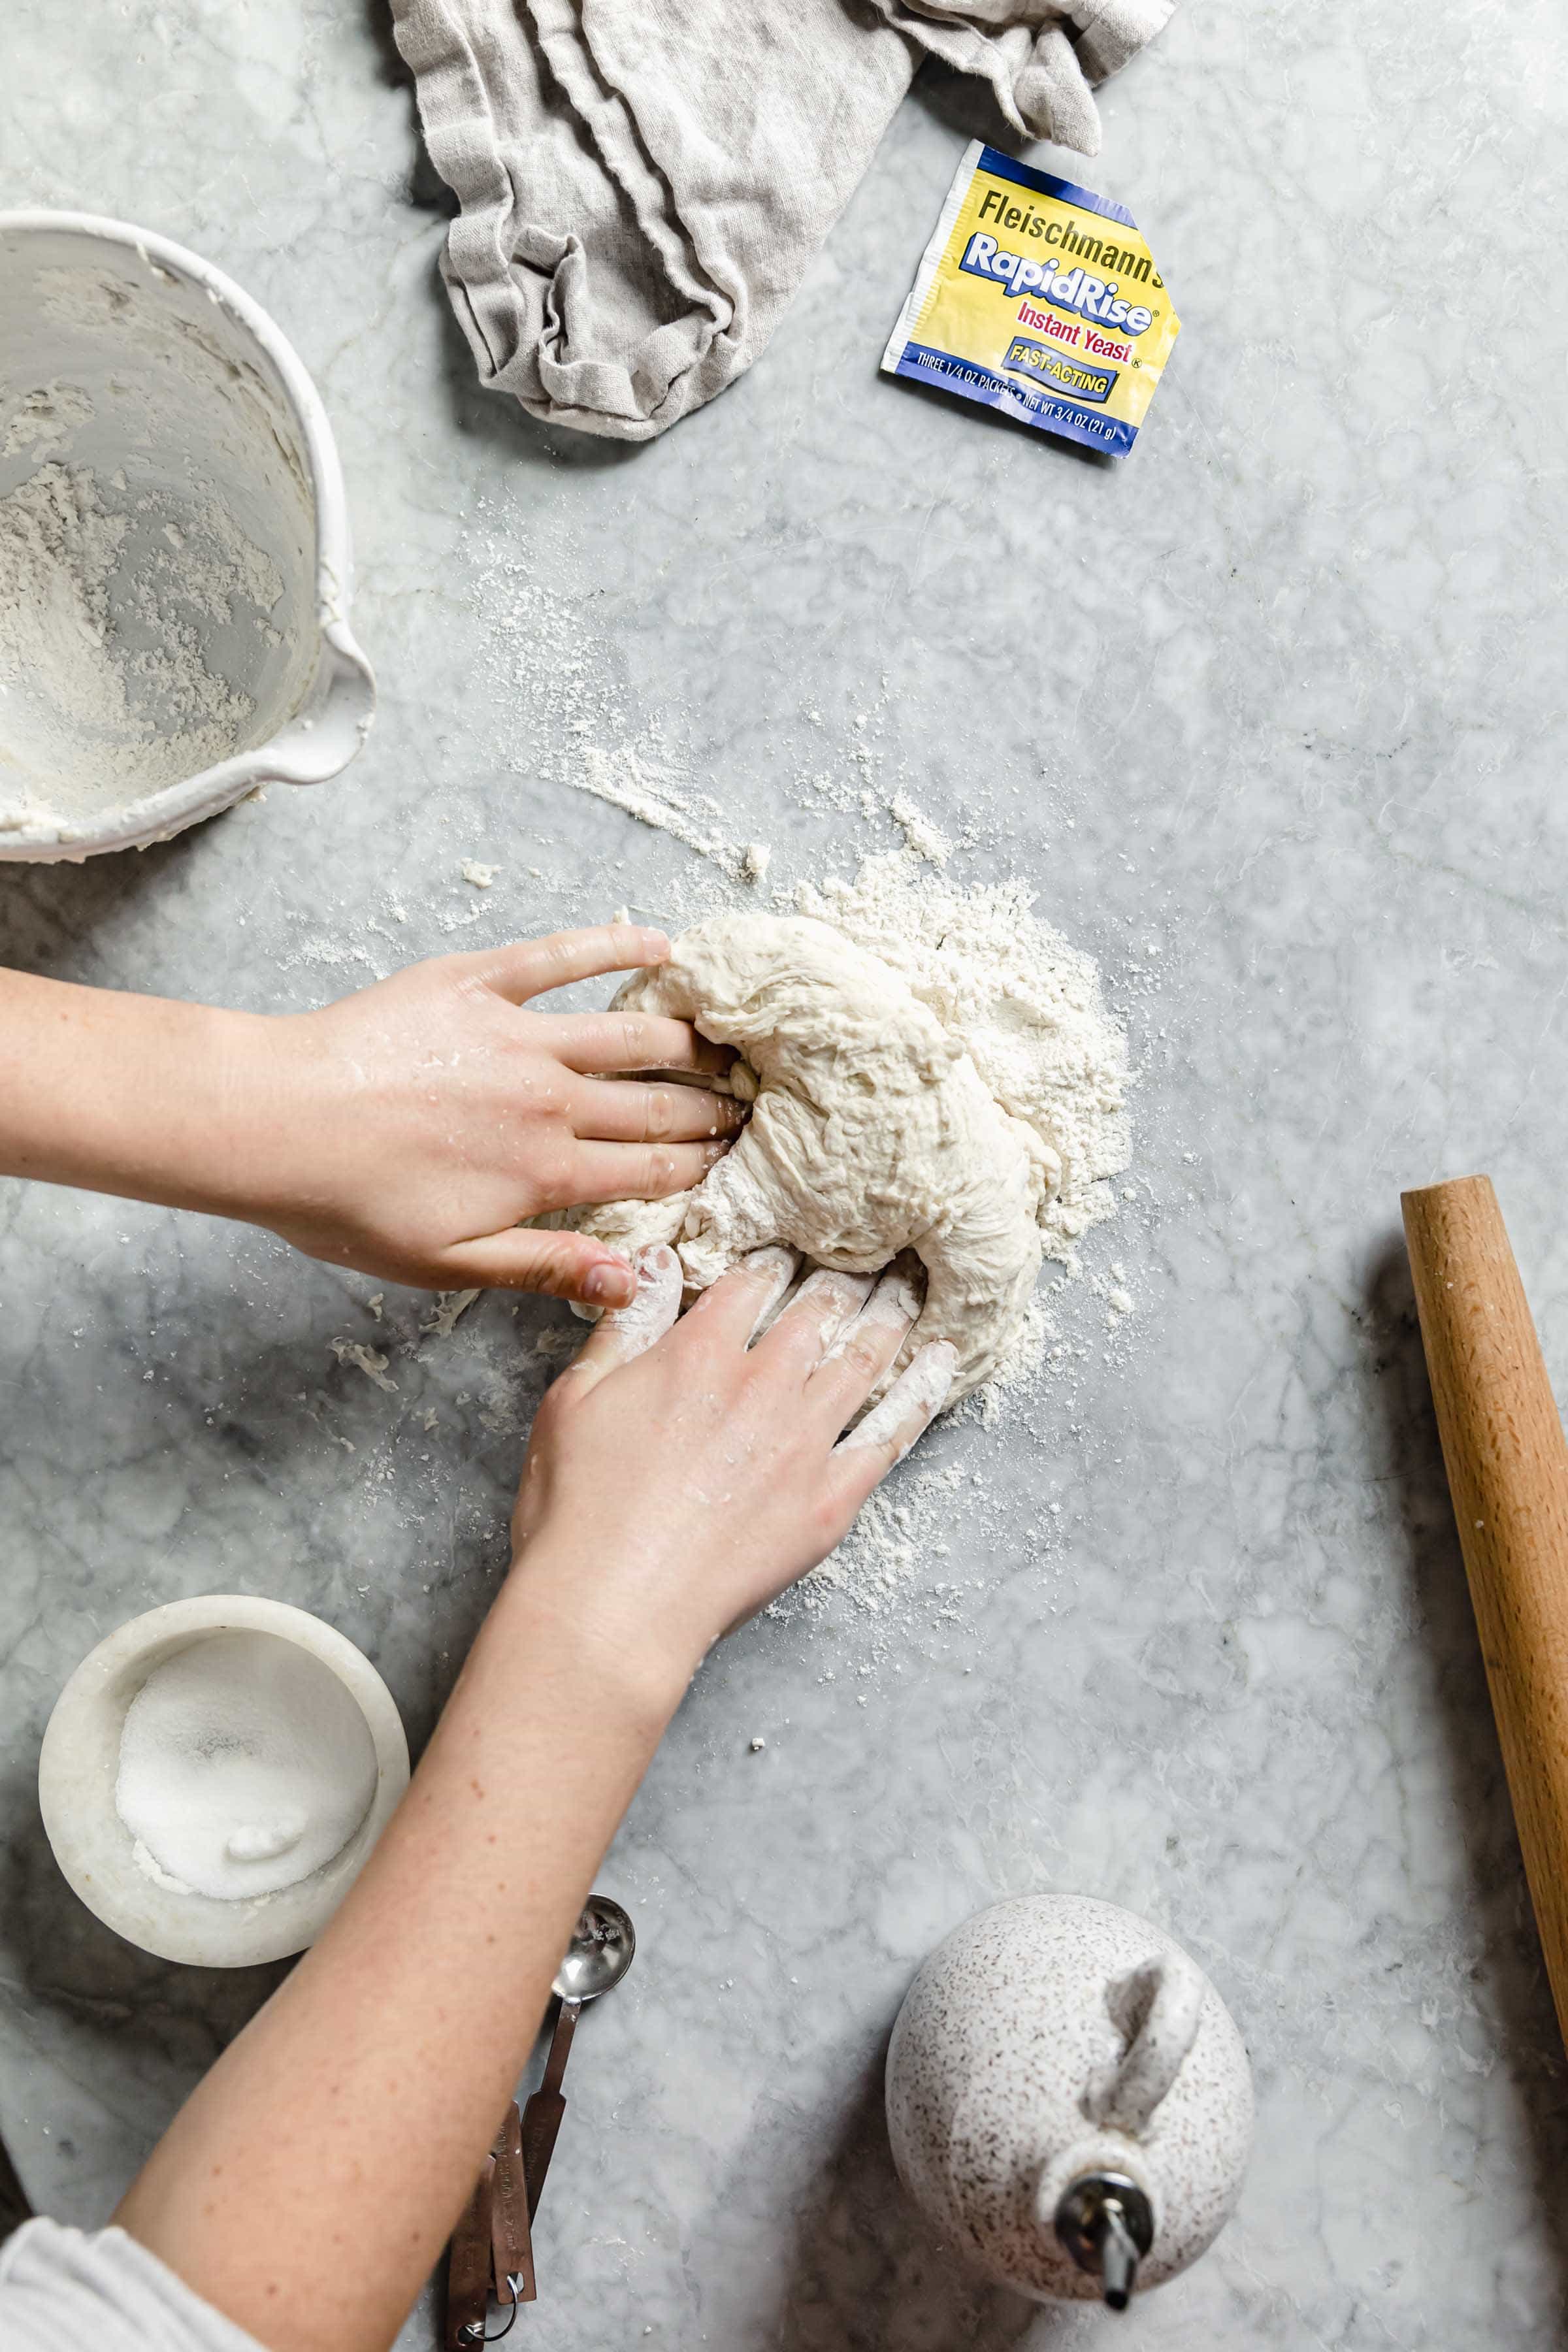 kneading pizza dough with hands on floured surface